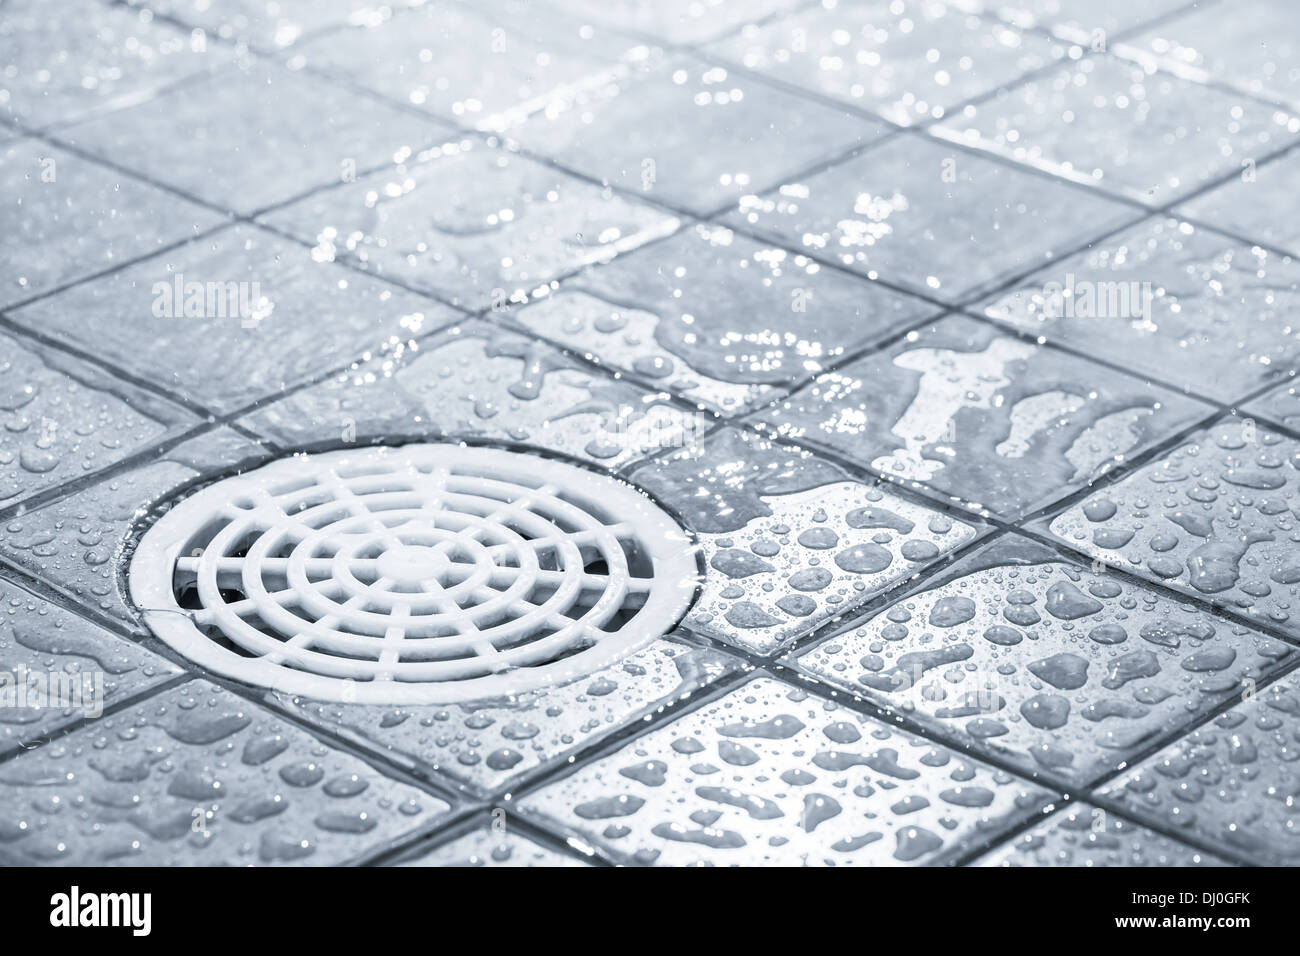 Shower Drainage Holes With Stainless Covers Set Stock Illustration